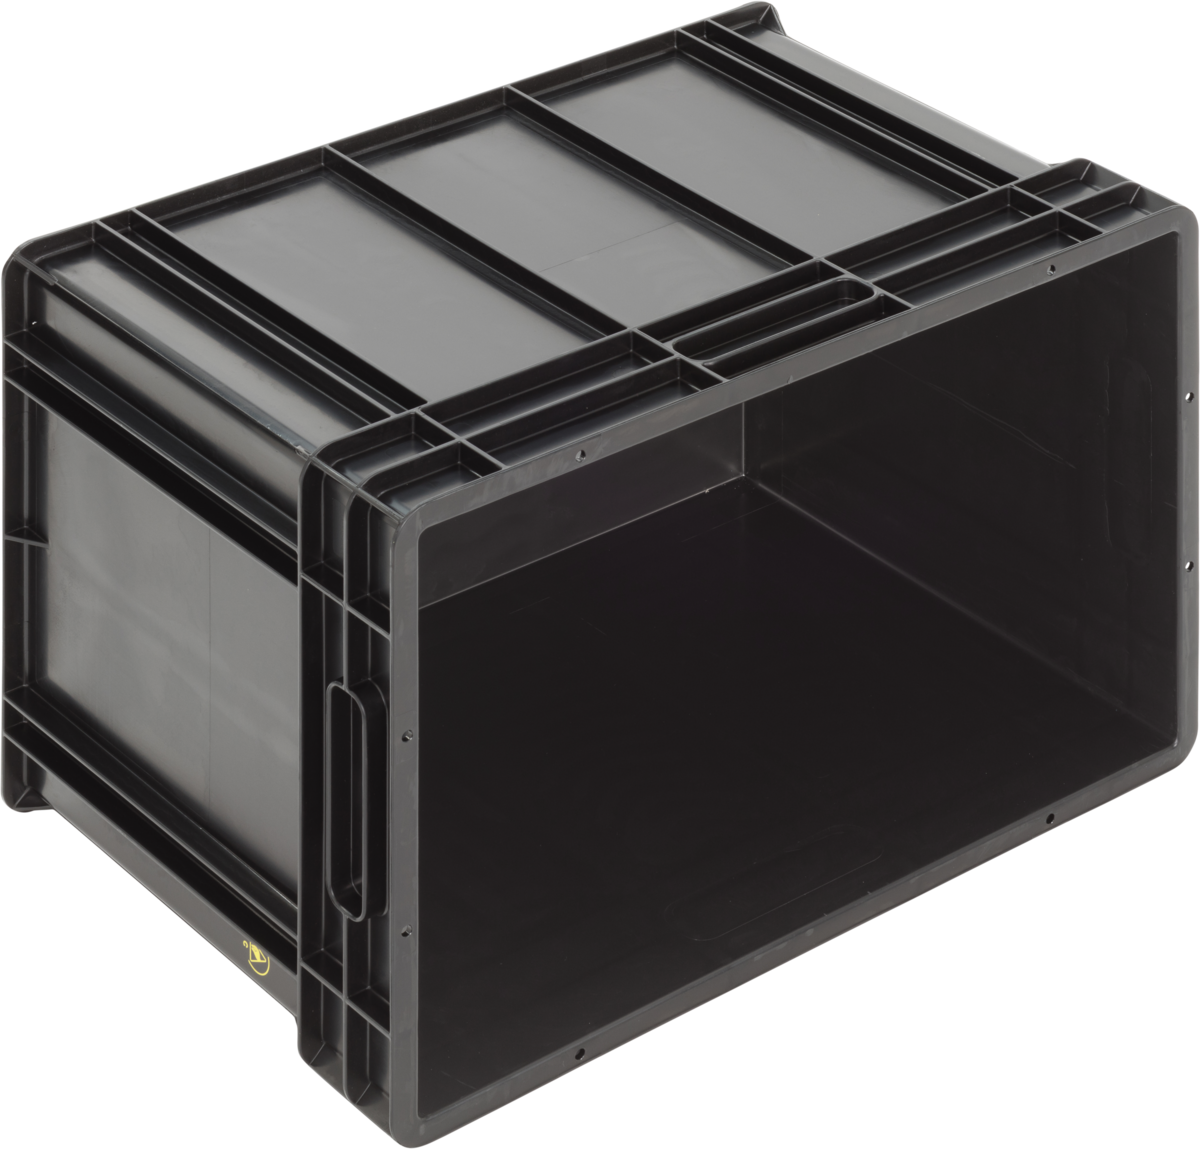 ESD-Safe-SGL-Norm-Stacking-Bin-Containers-Flat-Base-Ref.-6440.007.992_1004529_600x400x412_03